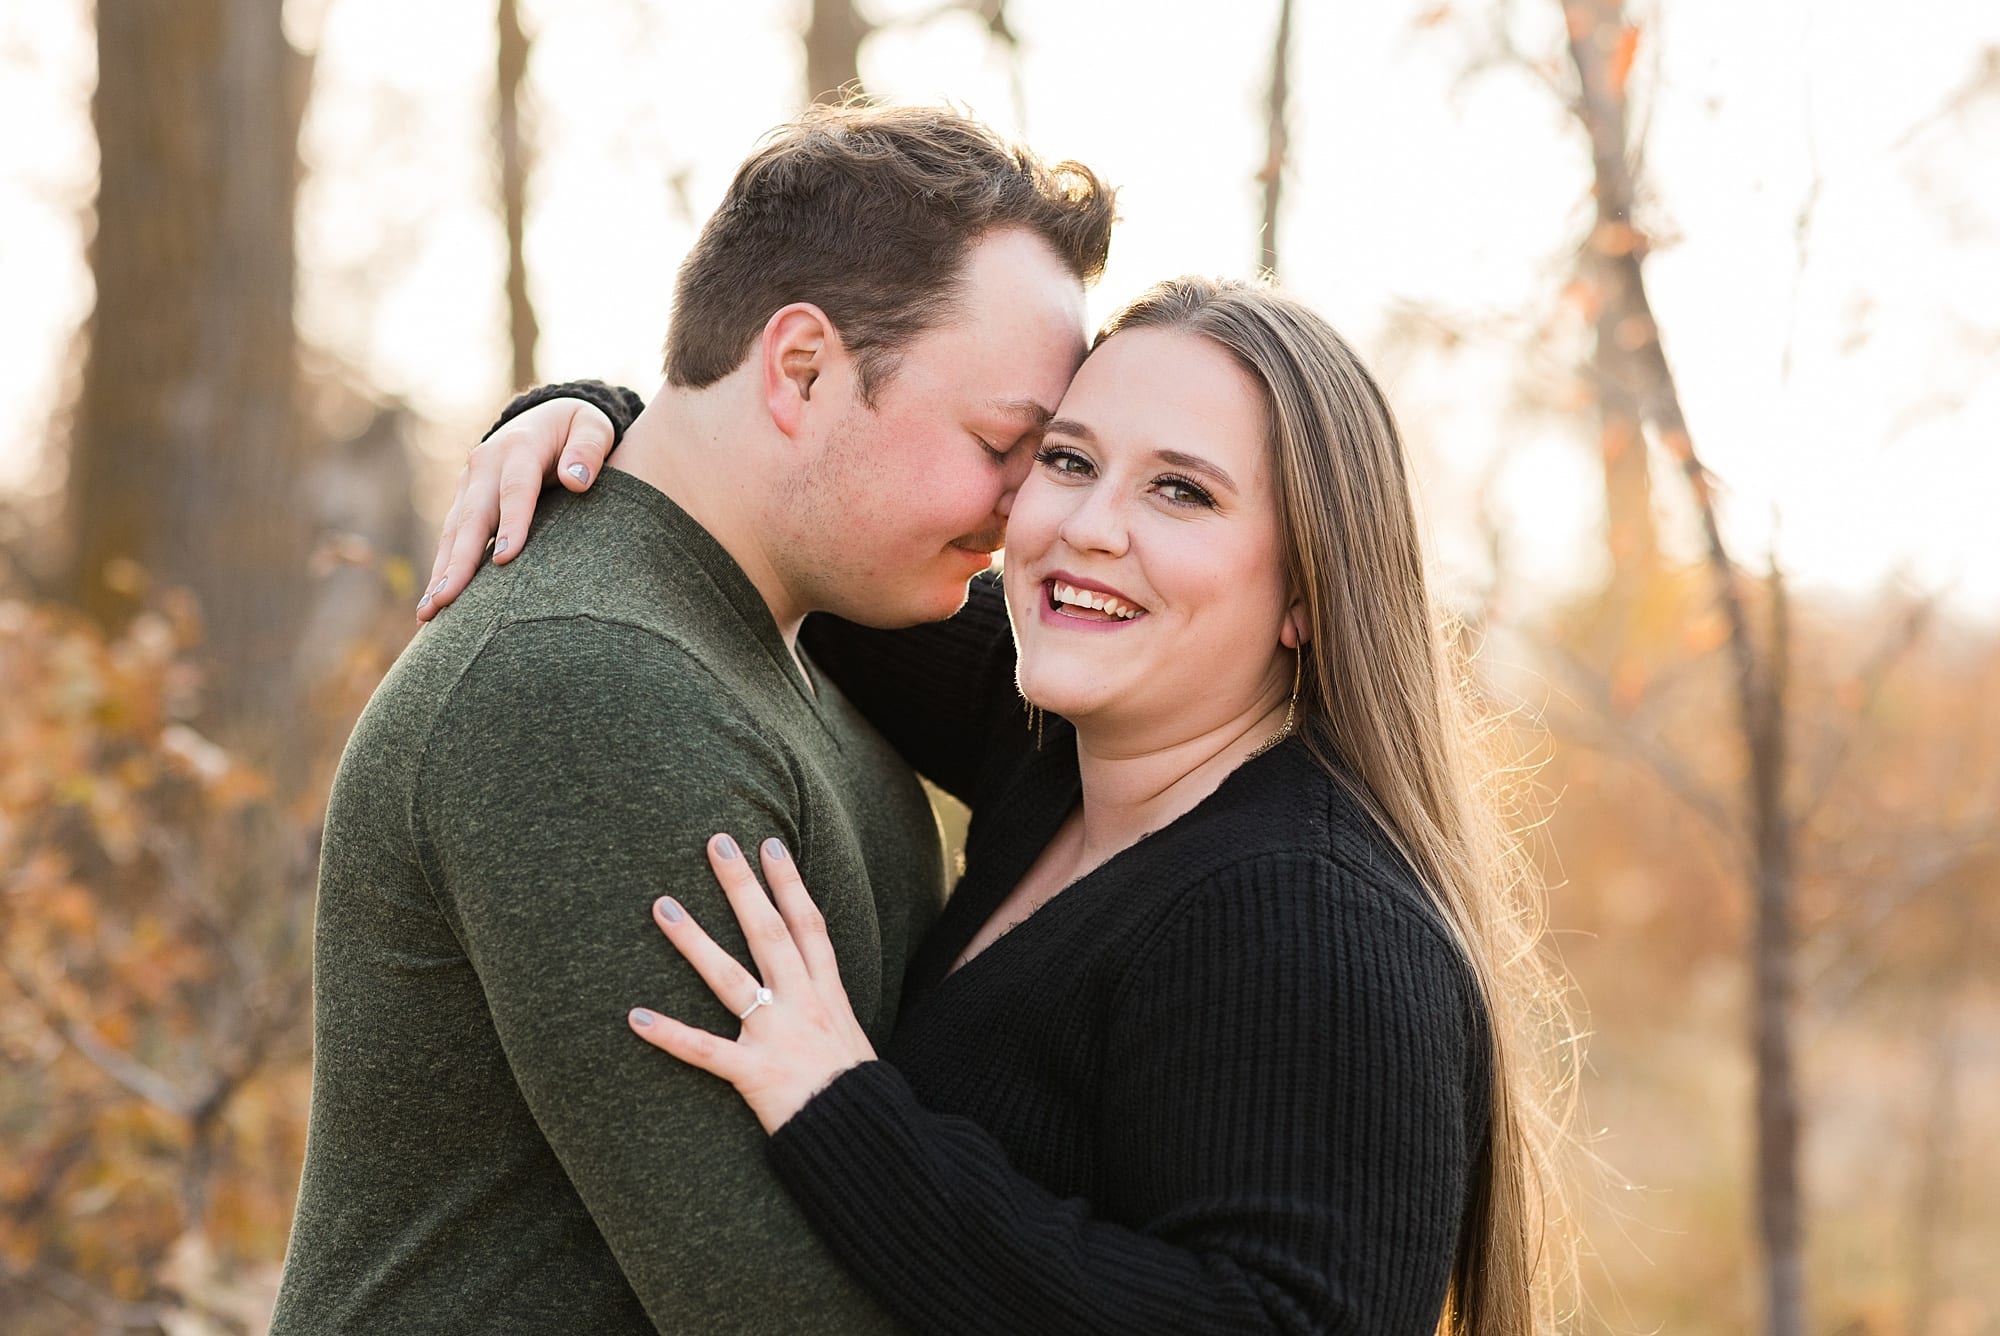 Guy leans into his fiance white she smiles during their Engagement Session at Sheyenne Grassland